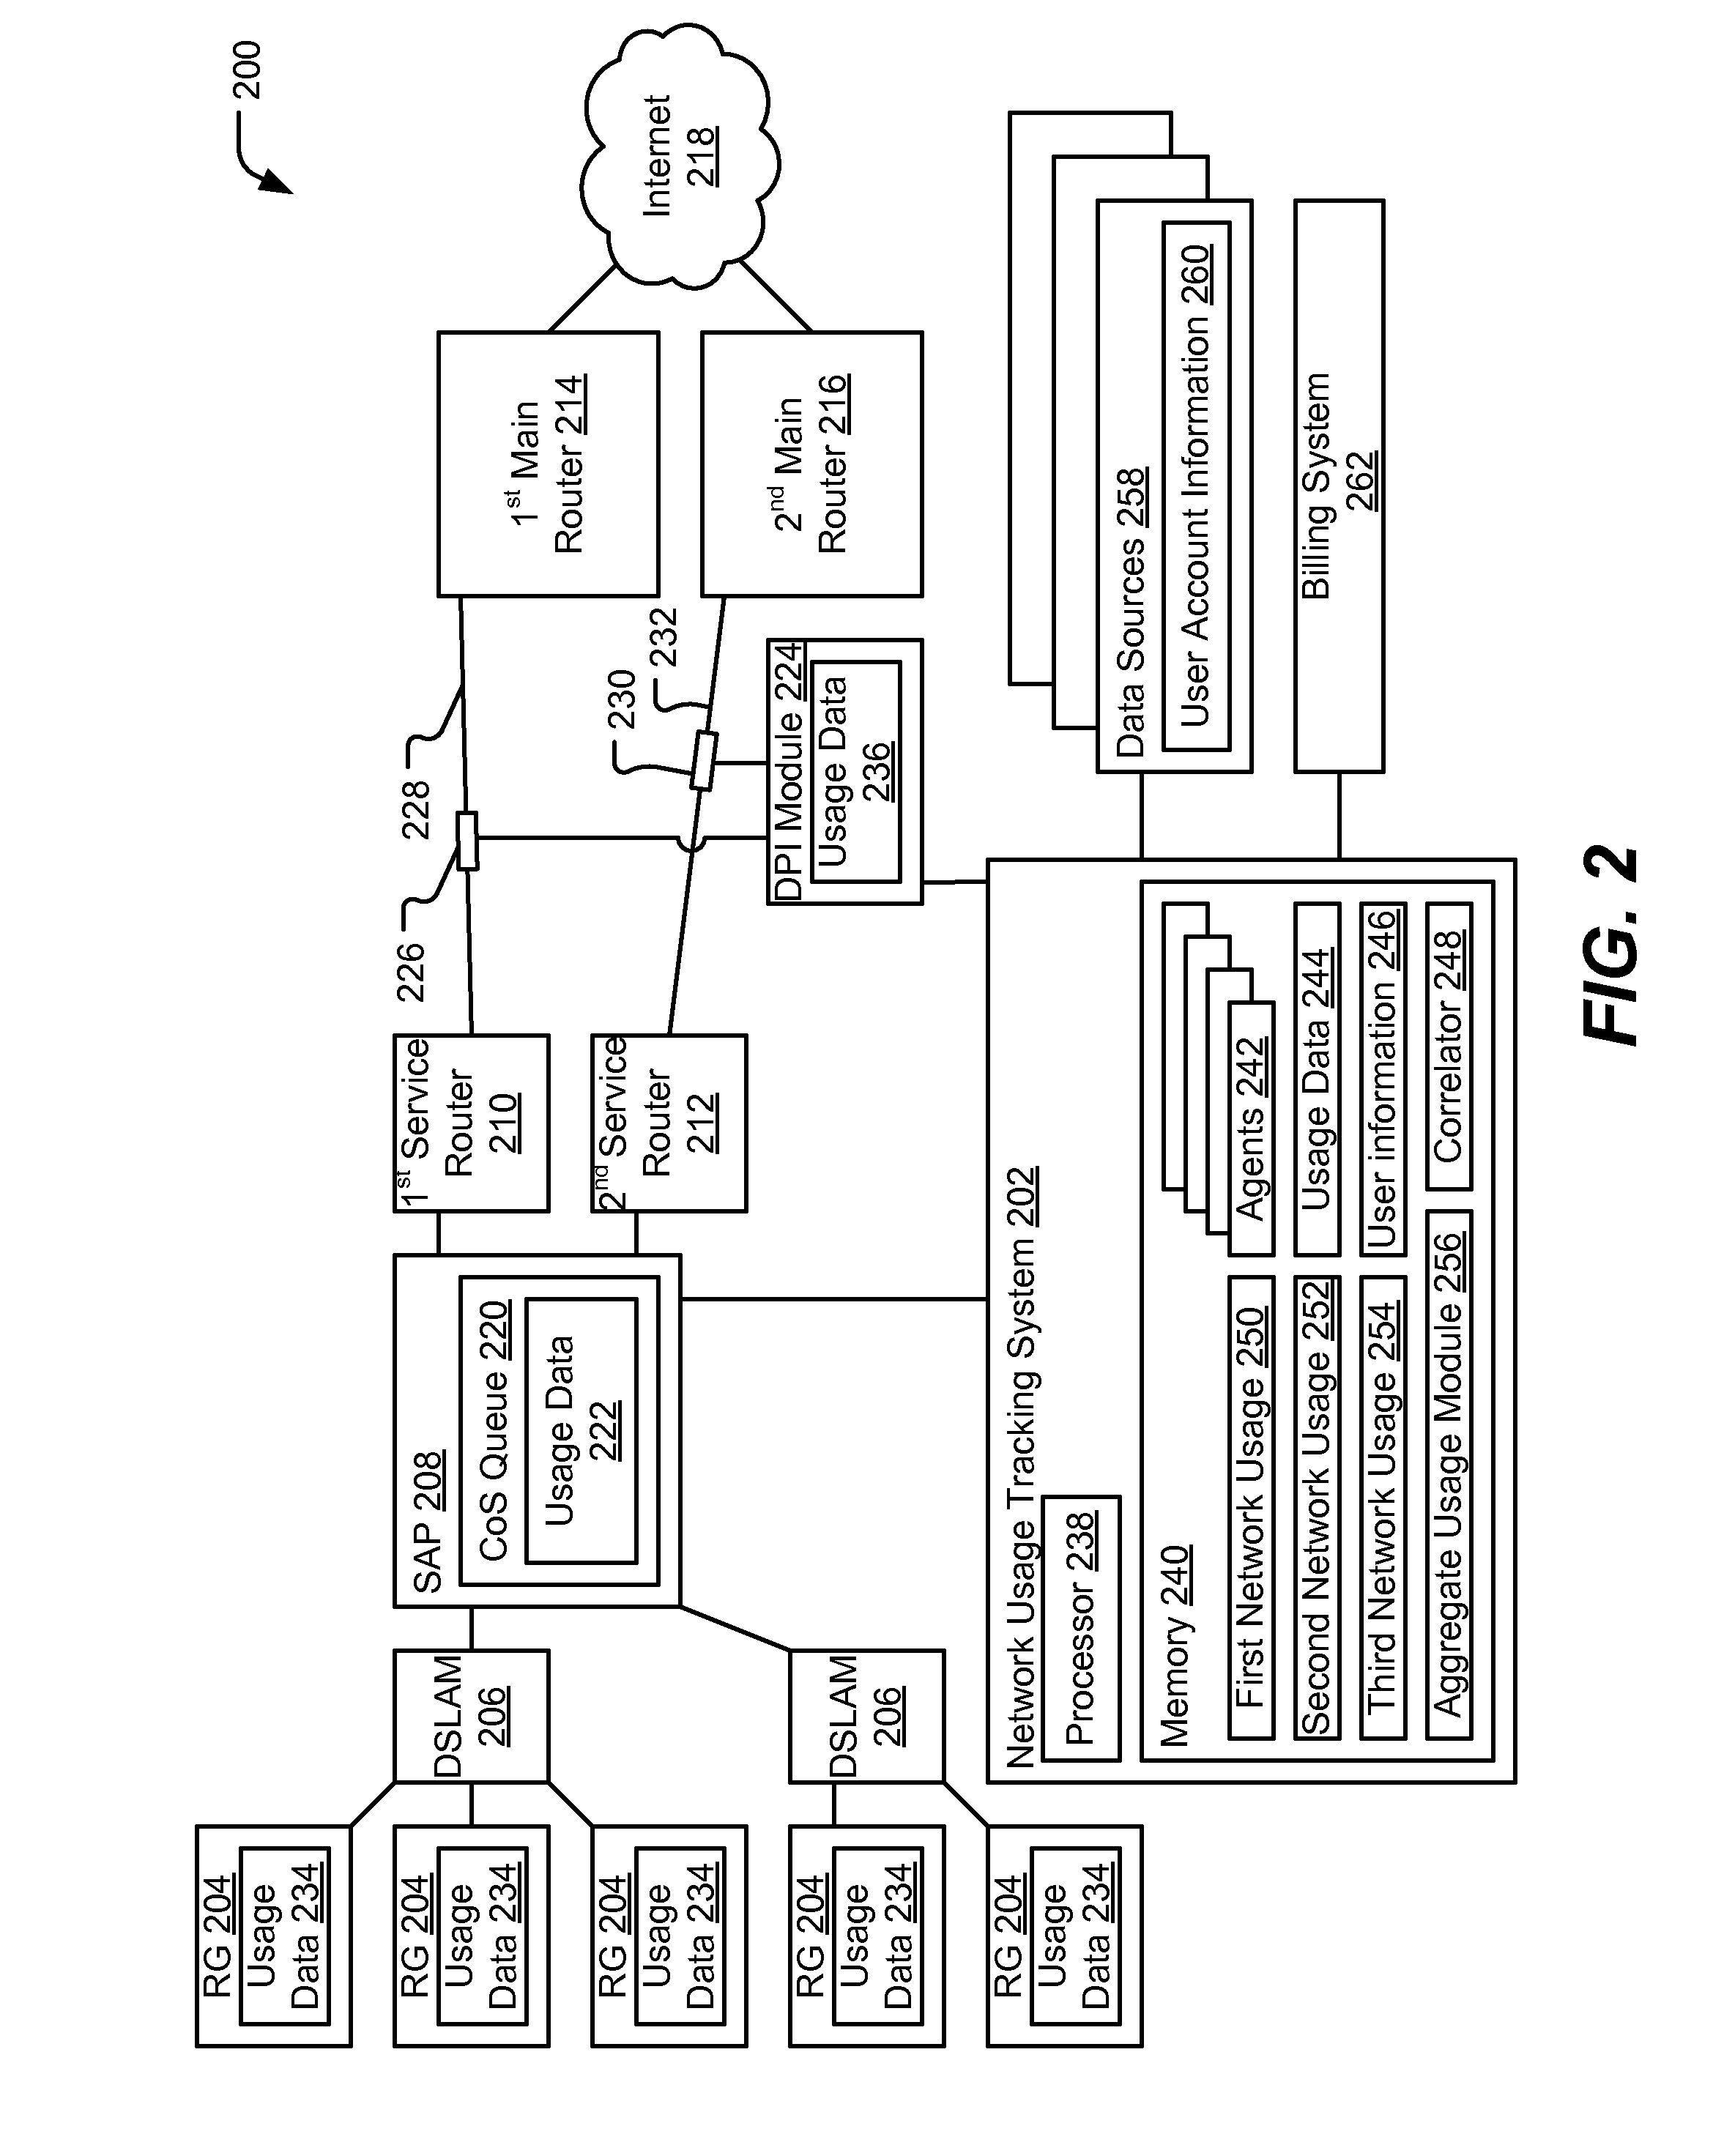 System and Method to Determine Network Usage